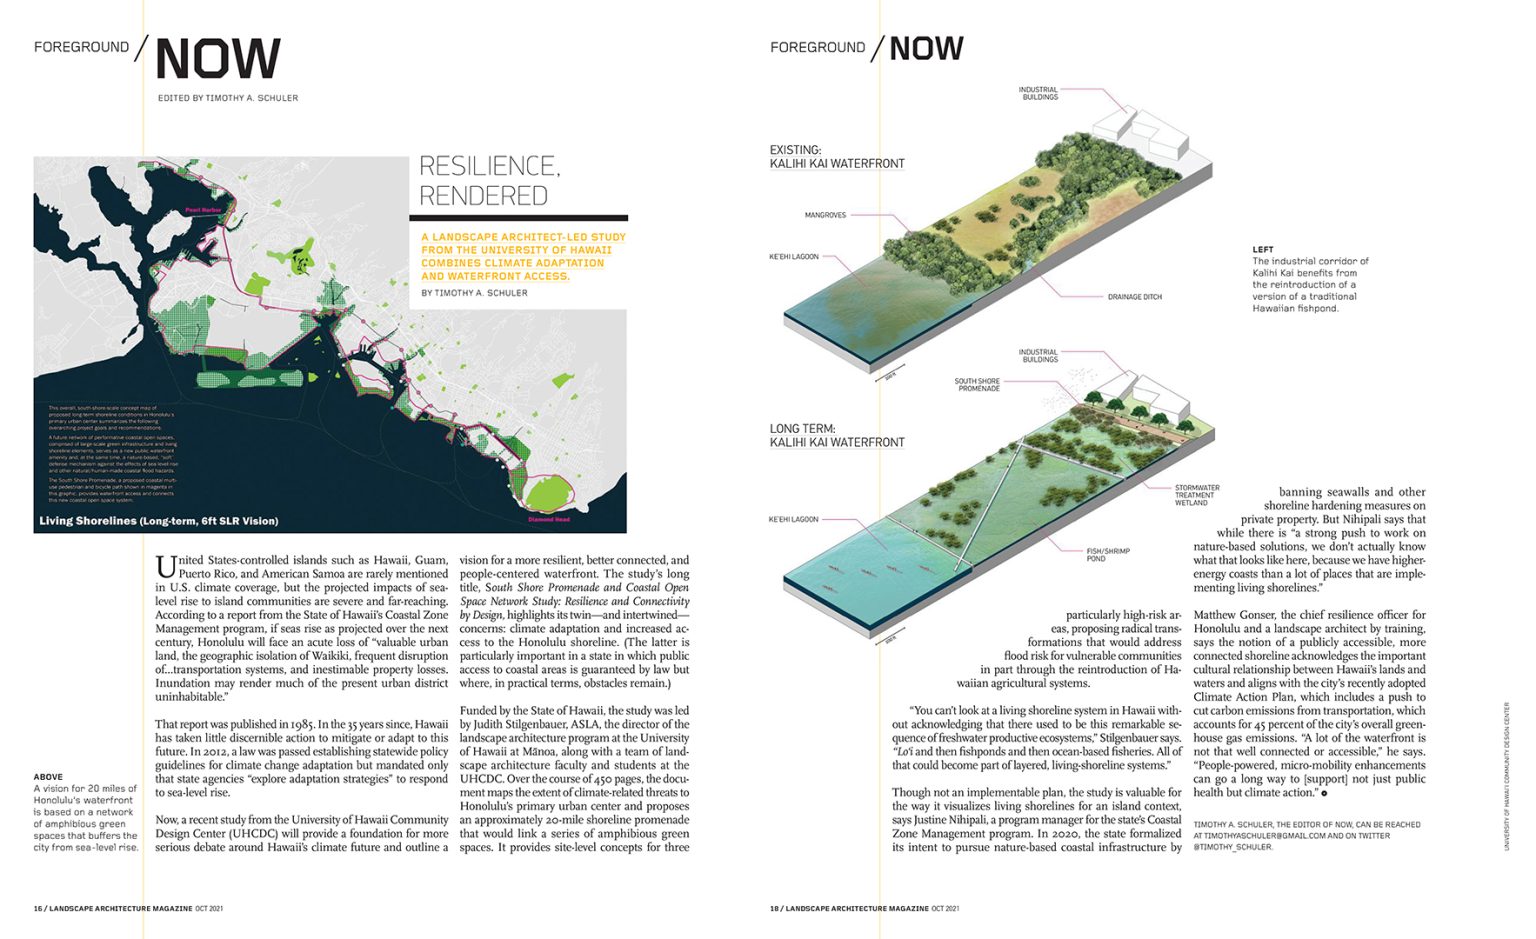 UHCDC South Shore Project Featured in Landscape Architecture Magazine